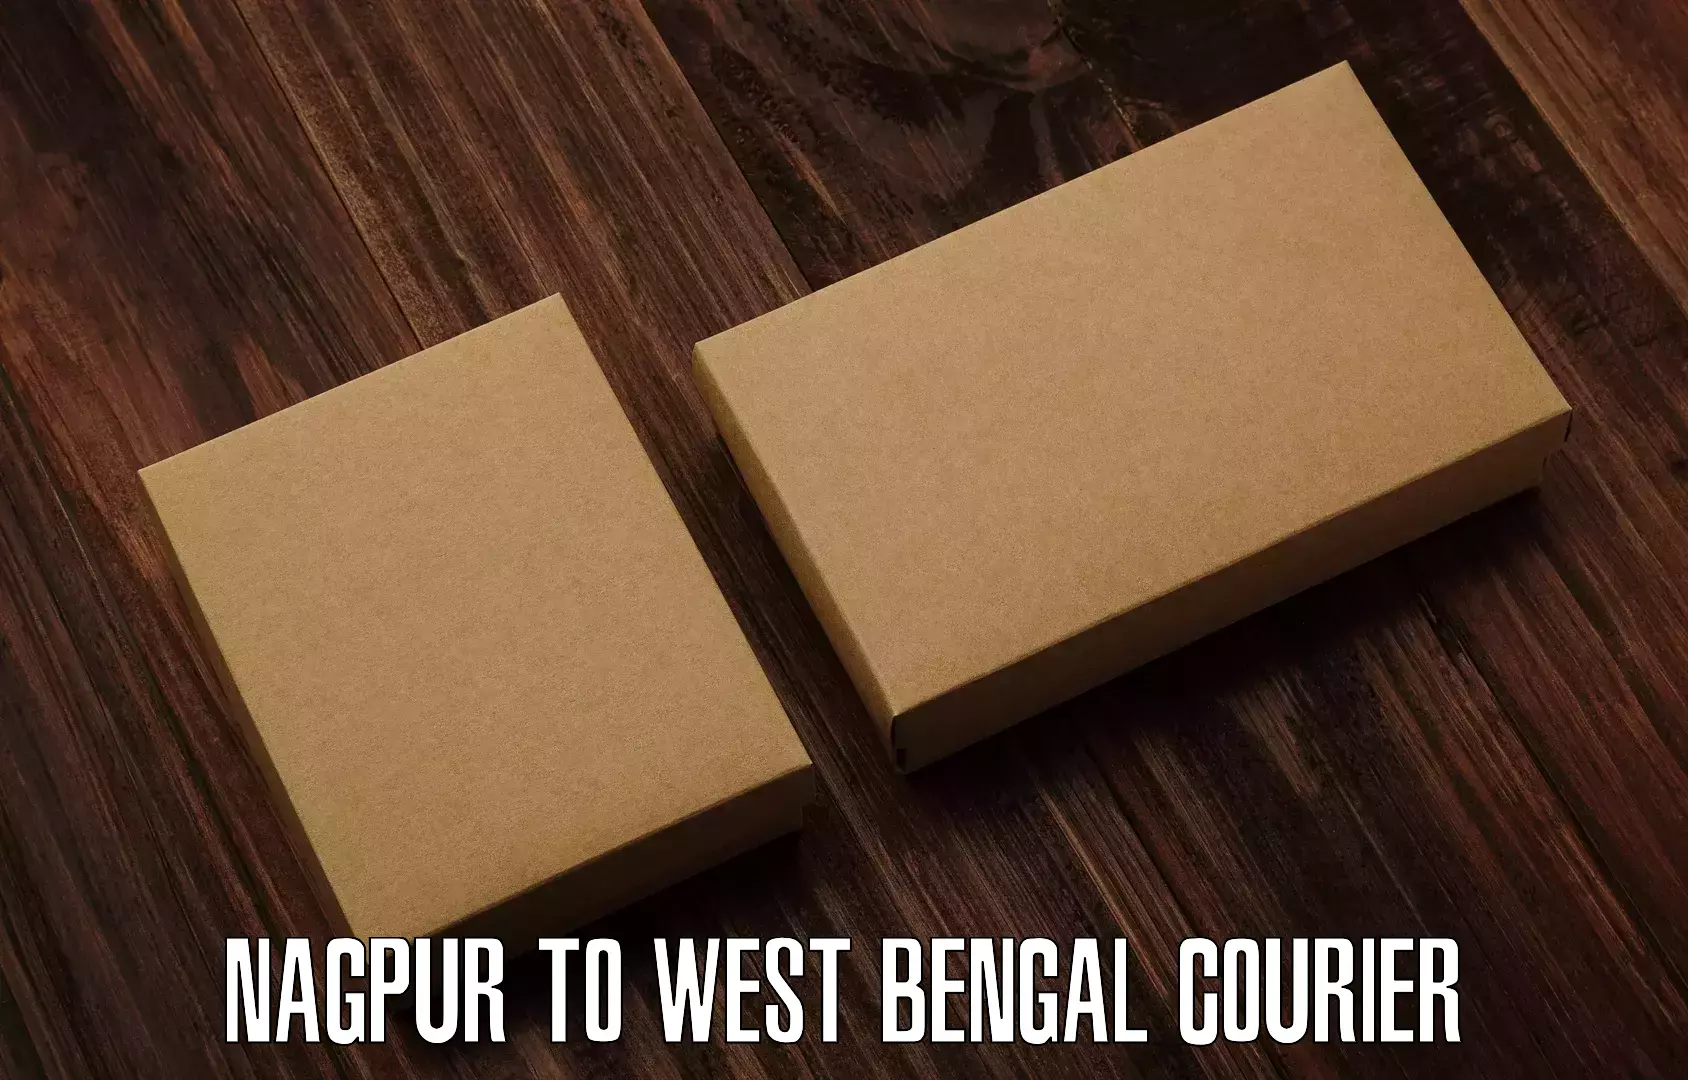 Customer-focused courier Nagpur to West Bengal